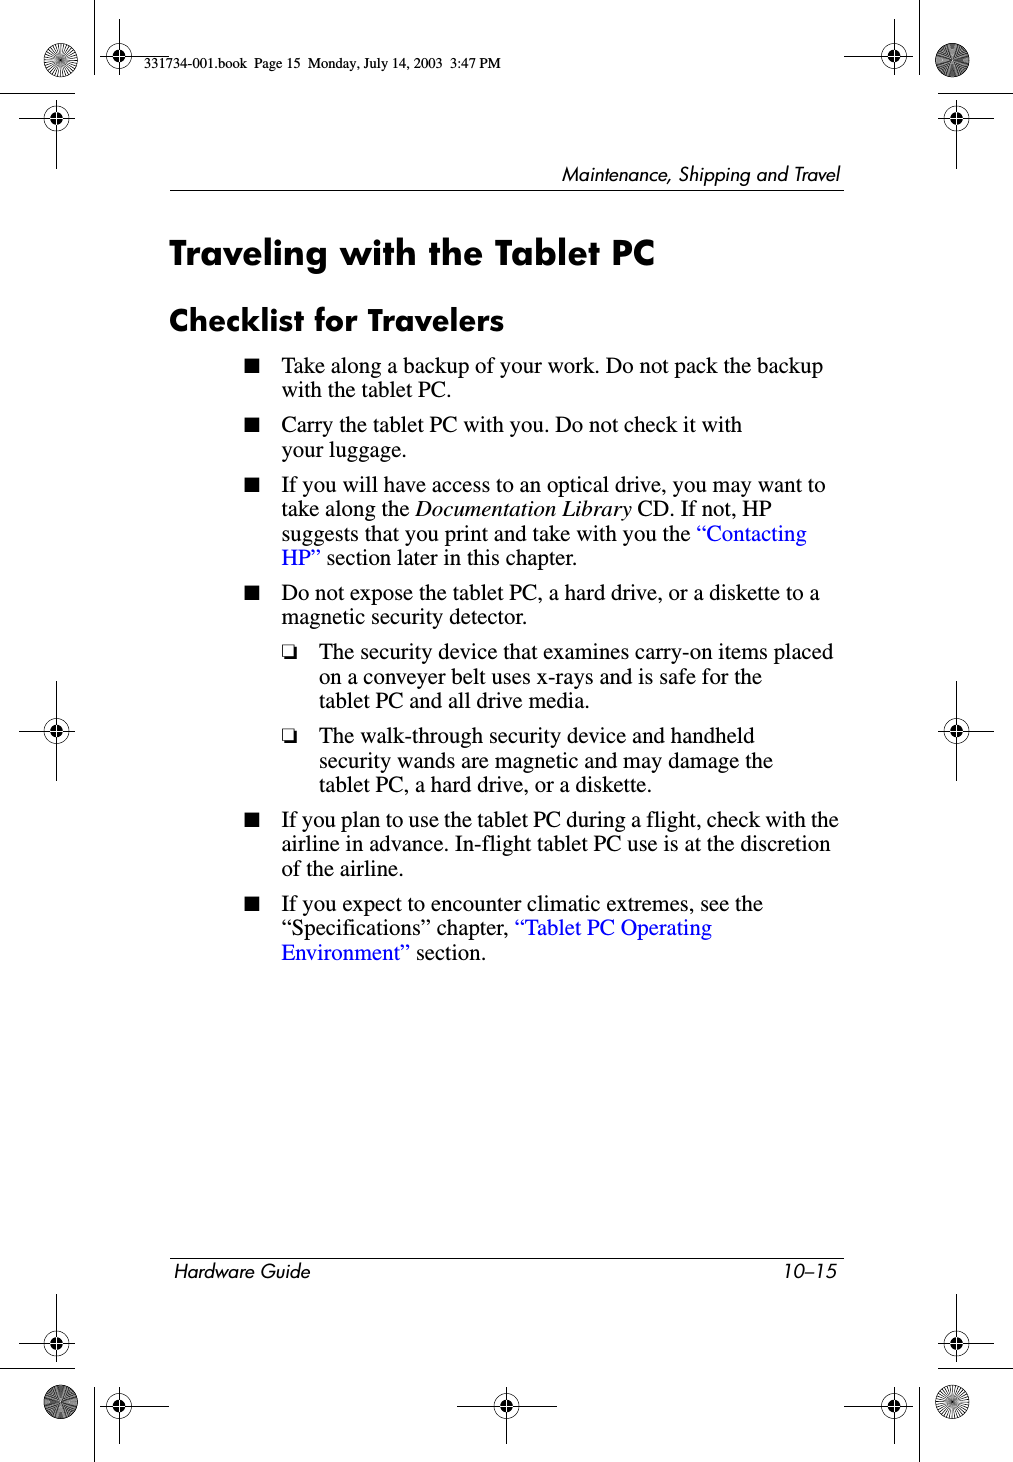 Maintenance, Shipping and TravelHardware Guide 10–15Traveling with the Tablet PCChecklist for Travelers■Take along a backup of your work. Do not pack the backup with the tablet PC.■Carry the tablet PC with you. Do not check it with your luggage.■If you will have access to an optical drive, you may want to take along the Documentation Library CD. If not, HP suggests that you print and take with you the “Contacting HP” section later in this chapter.■Do not expose the tablet PC, a hard drive, or a diskette to a magnetic security detector.❏The security device that examines carry-on items placed on a conveyer belt uses x-rays and is safe for the tablet PC and all drive media.❏The walk-through security device and handheld security wands are magnetic and may damage the tablet PC, a hard drive, or a diskette.■If you plan to use the tablet PC during a flight, check with the airline in advance. In-flight tablet PC use is at the discretion of the airline.■If you expect to encounter climatic extremes, see the “Specifications” chapter, “Tablet PC Operating Environment” section.331734-001.book  Page 15  Monday, July 14, 2003  3:47 PM